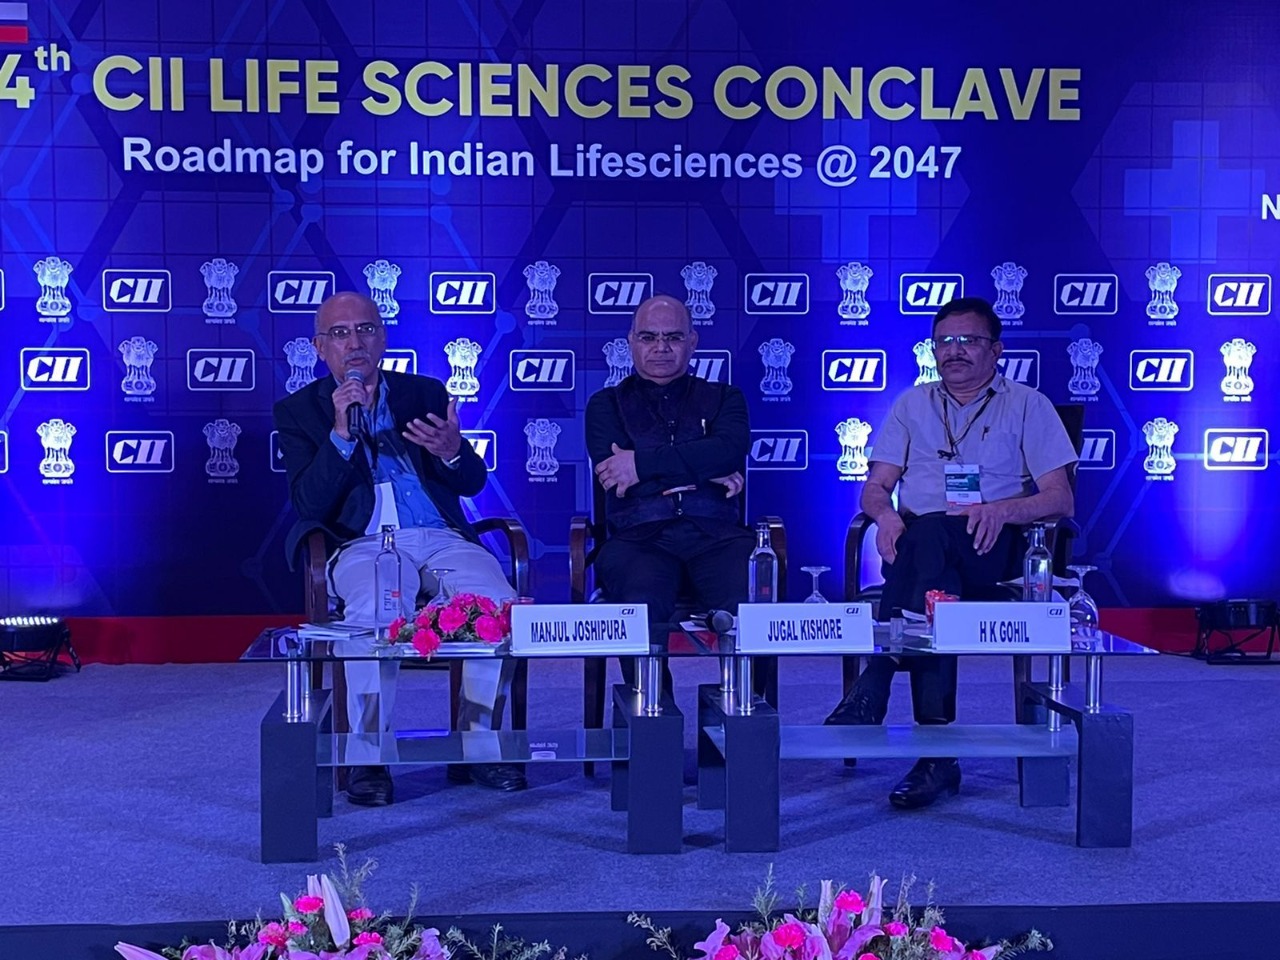 National-campaign-for-rabies-free-India-by-2030---launched-at-the-4th-CII-Life-Sciences-Conclave